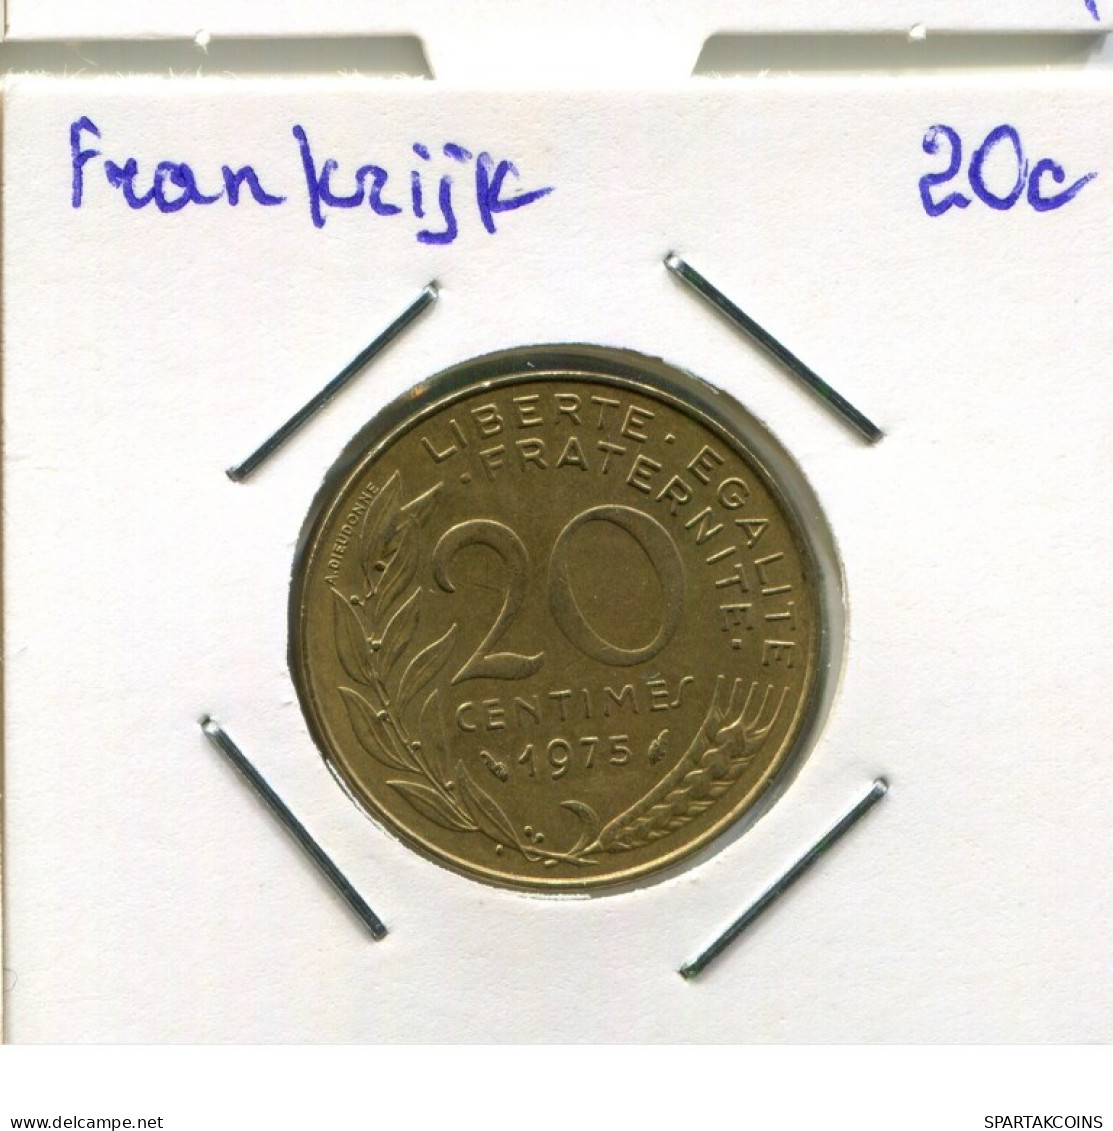 20 CENTIMES 1975 FRANCE Coin French Coin #AM856.U.A - 20 Centimes